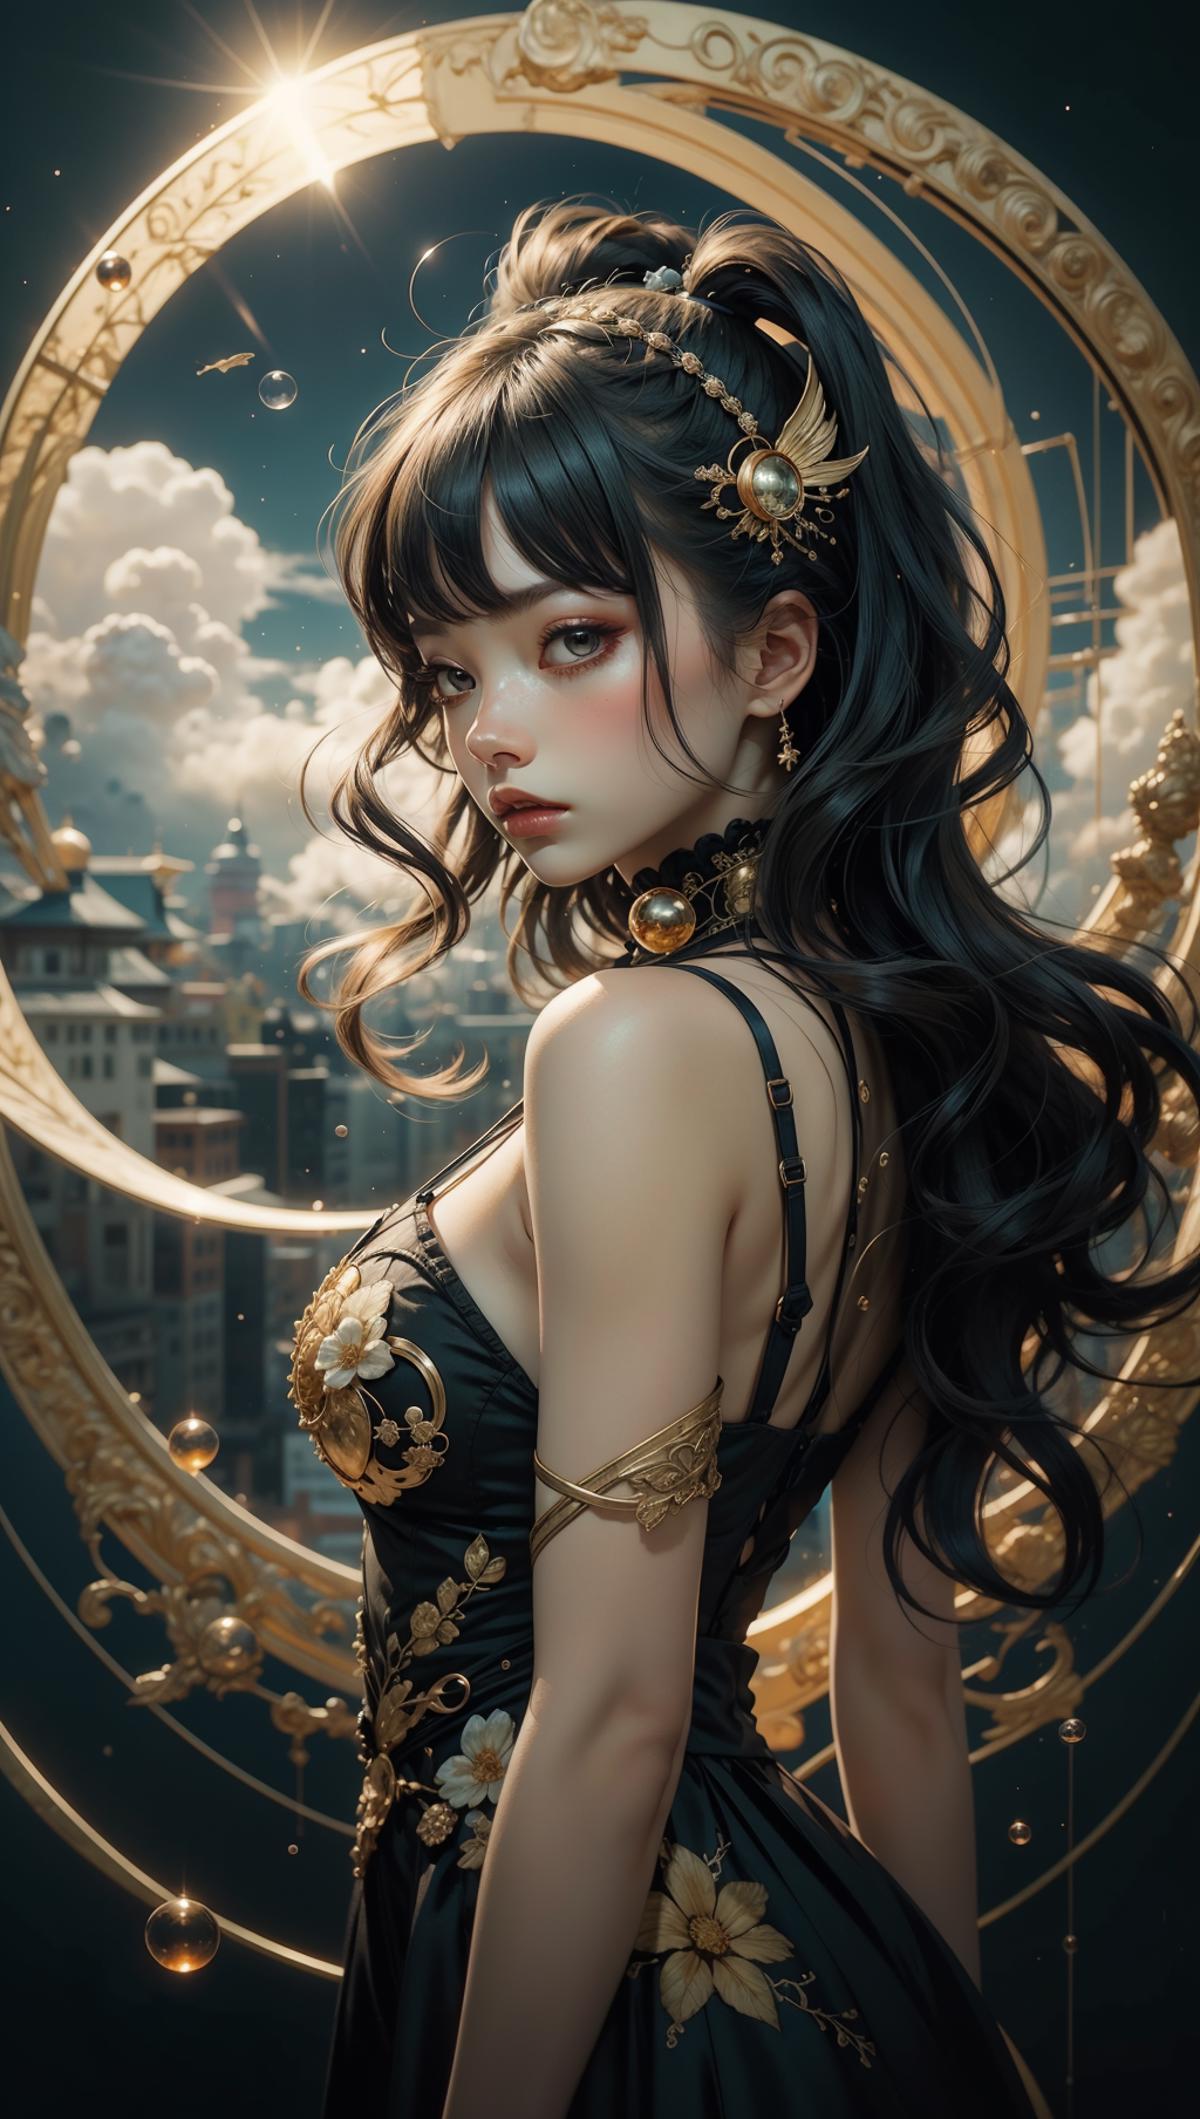 Anime-style portrait of a woman with black hair and a gold headband.